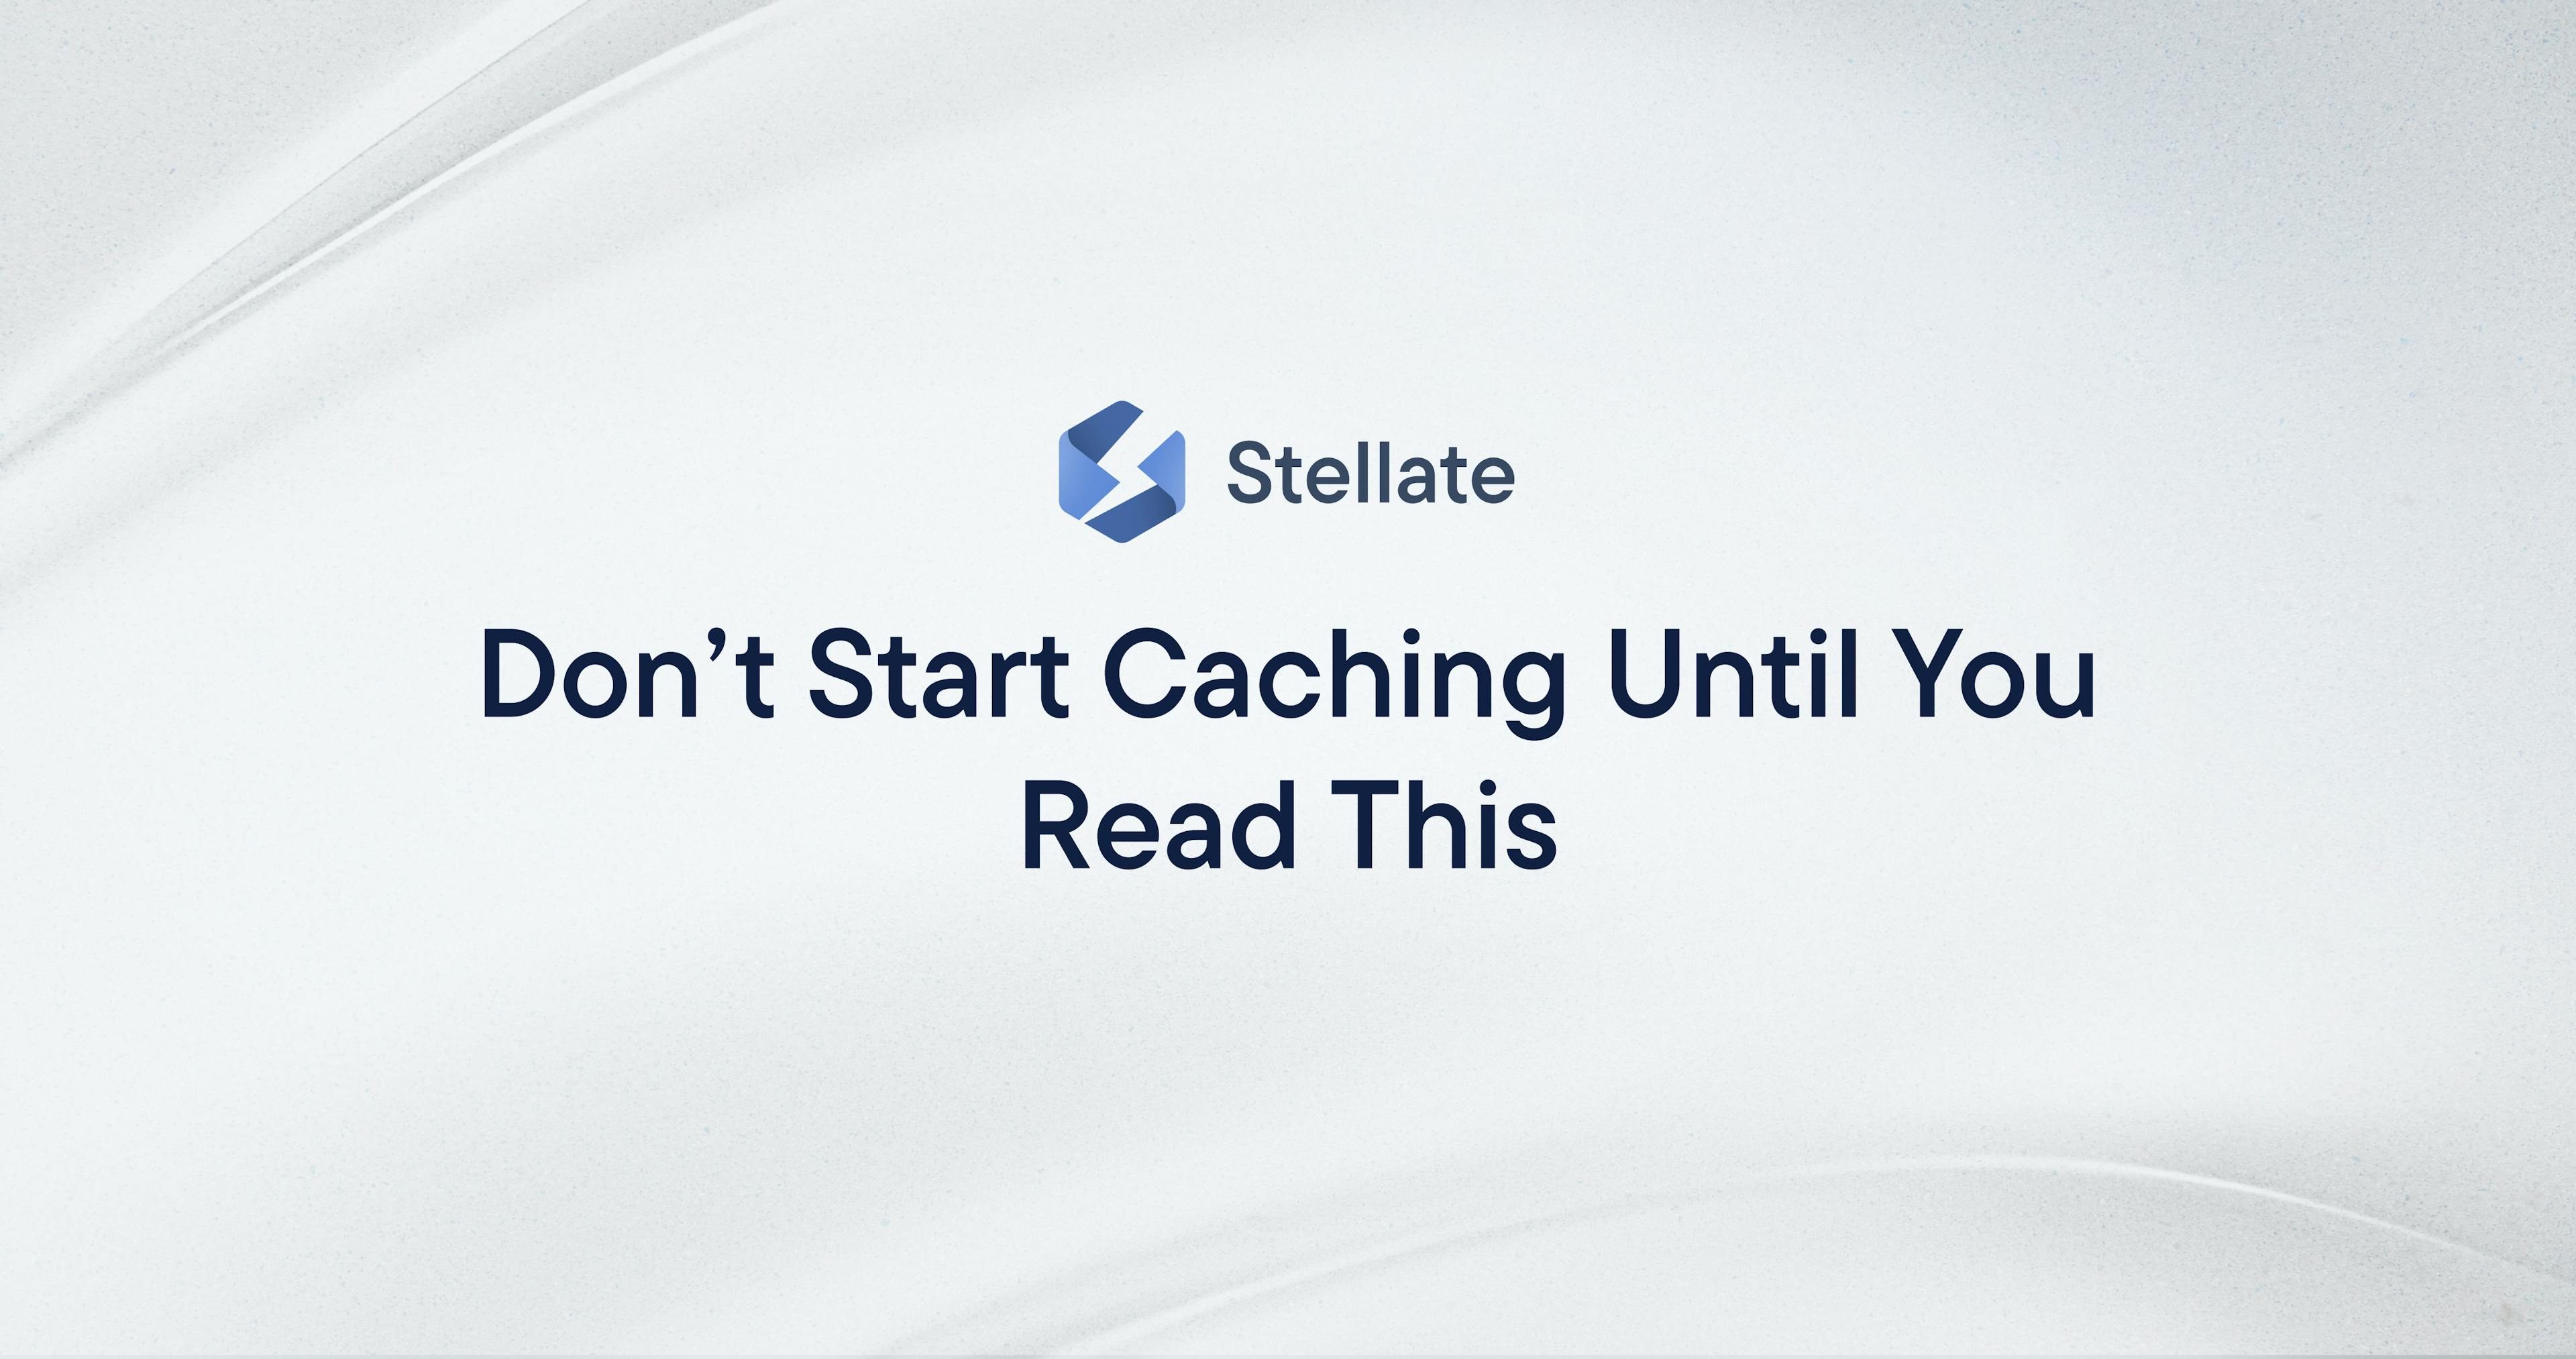 Don’t Start Caching Until You Read This